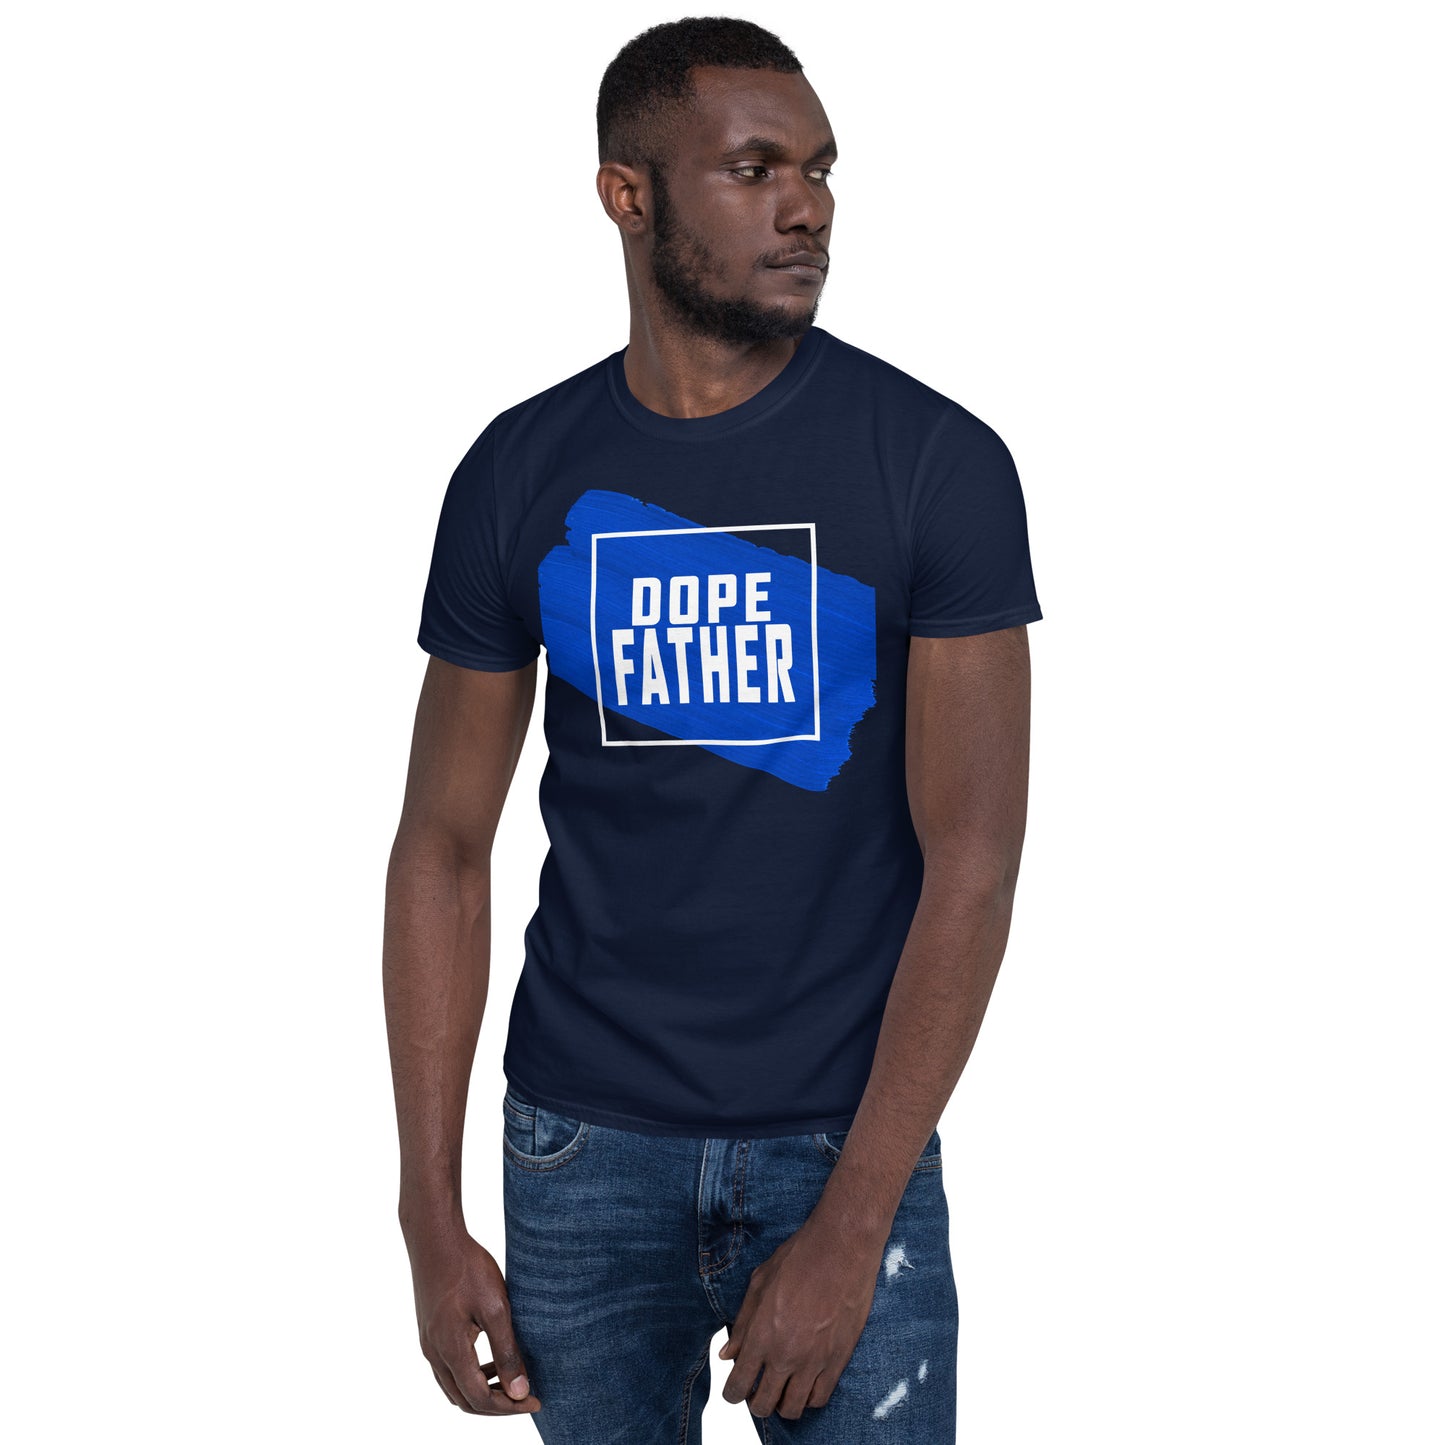 Adult "Dope Father" T-Shirt